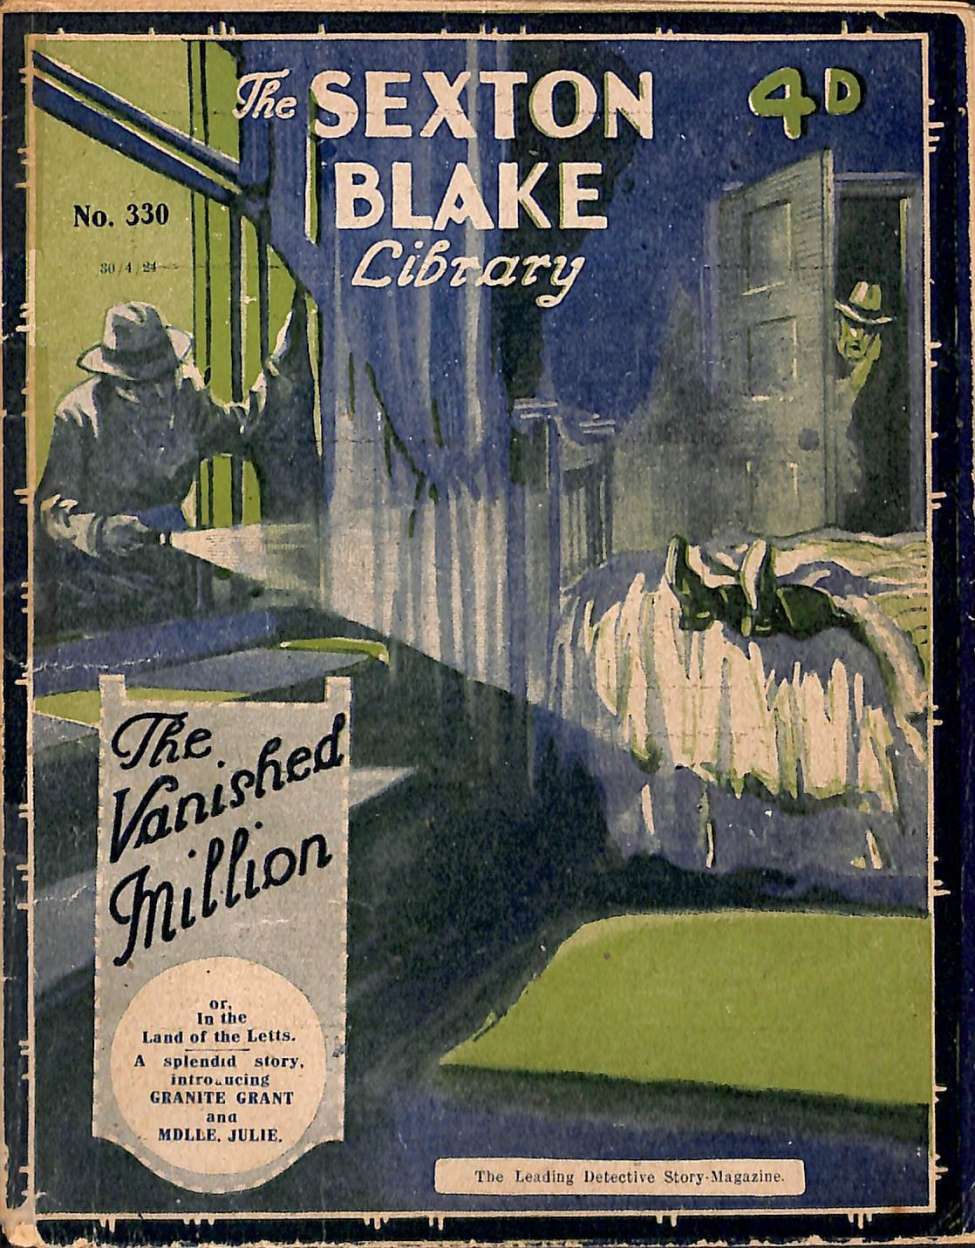 Comic Book Cover For Sexton Blake Library S1 330 - The Vanished Million